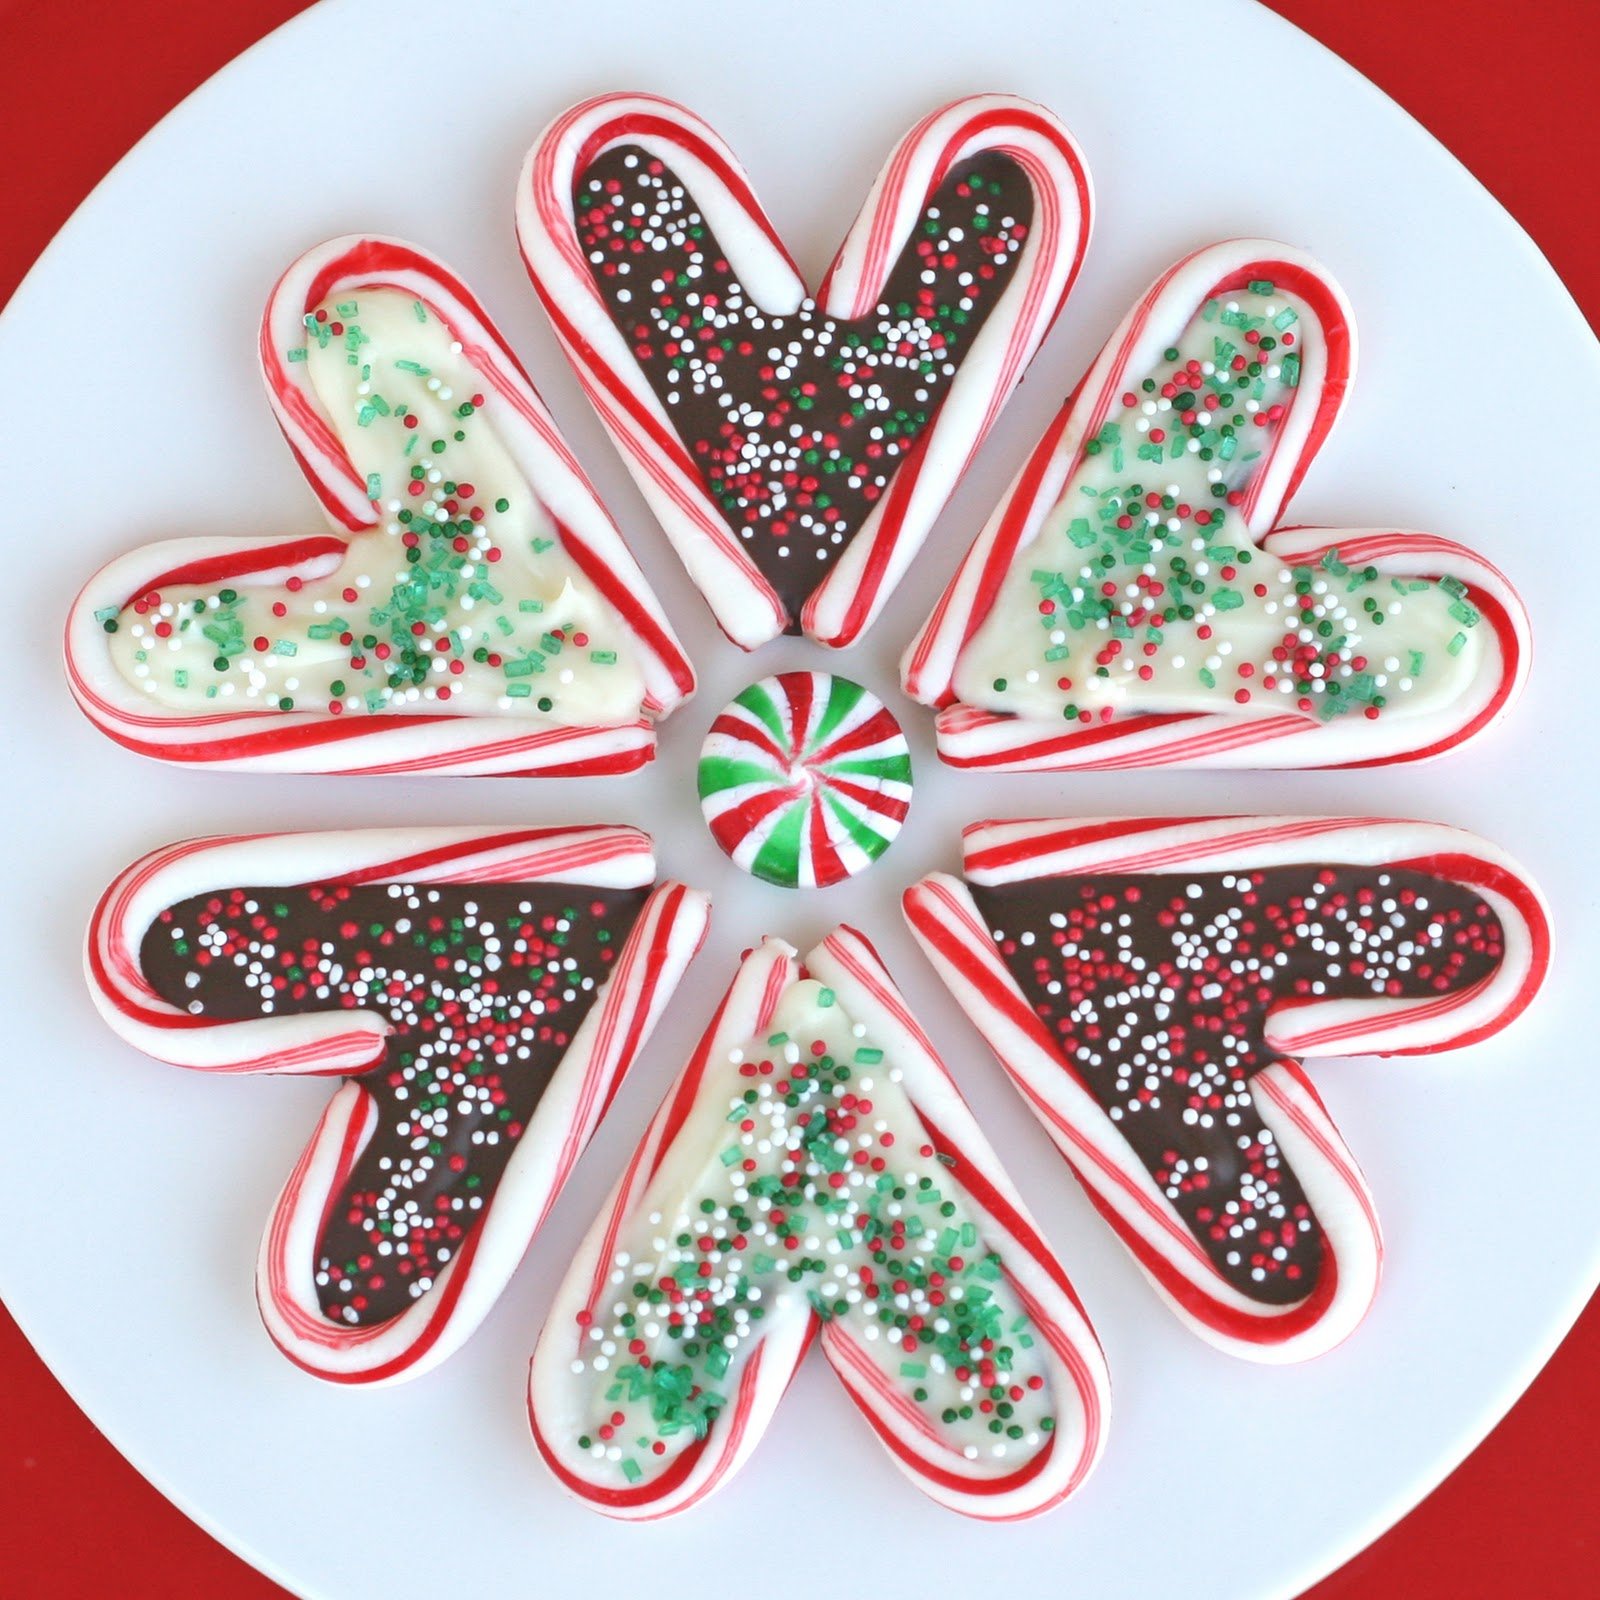 hearts made from candy canes and melted chocolate and decorated with christmas sprinkles sitting on a white plate.